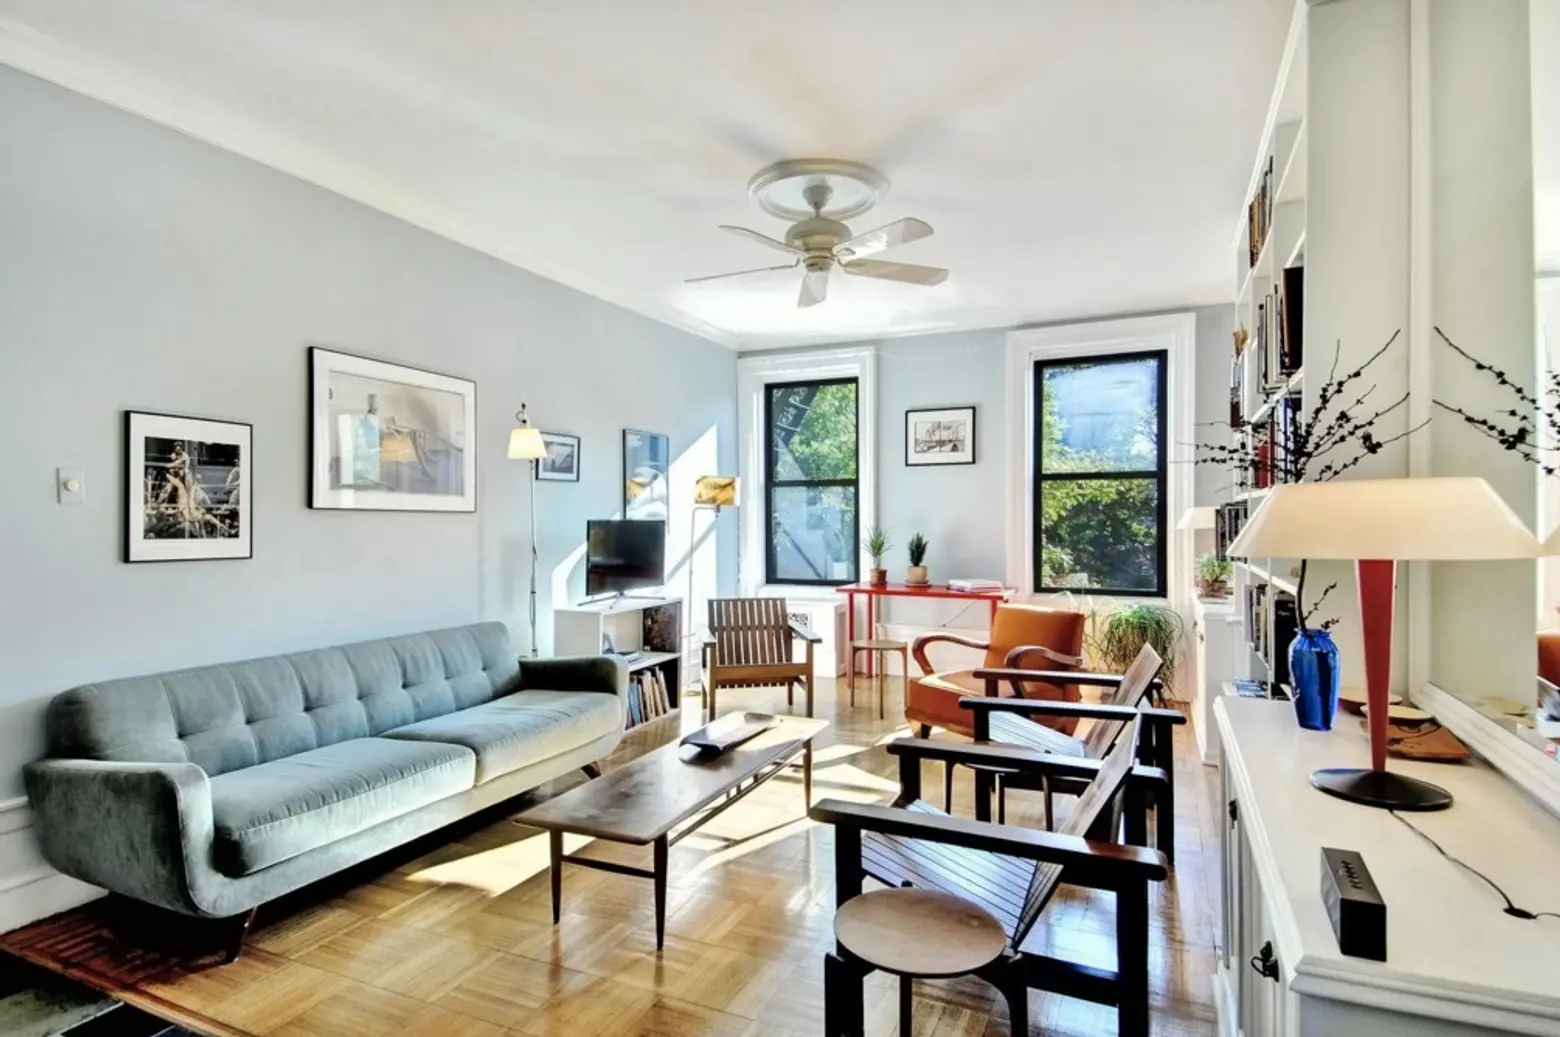 500 West 111th Street, living room, co-op apartment, morningside heights